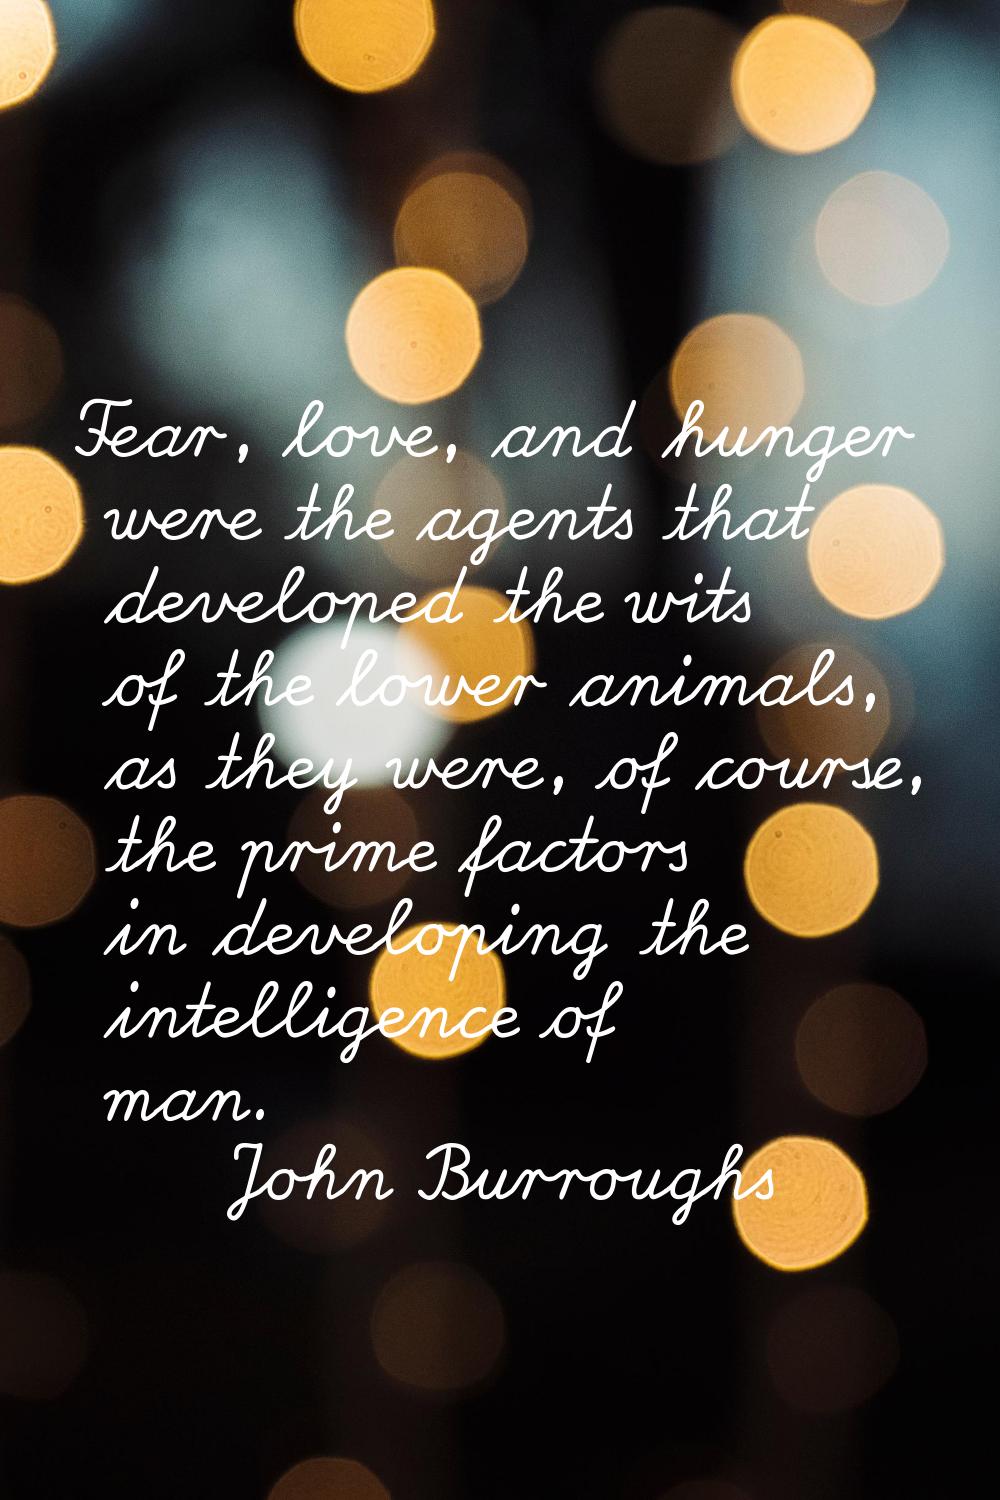 Fear, love, and hunger were the agents that developed the wits of the lower animals, as they were, 